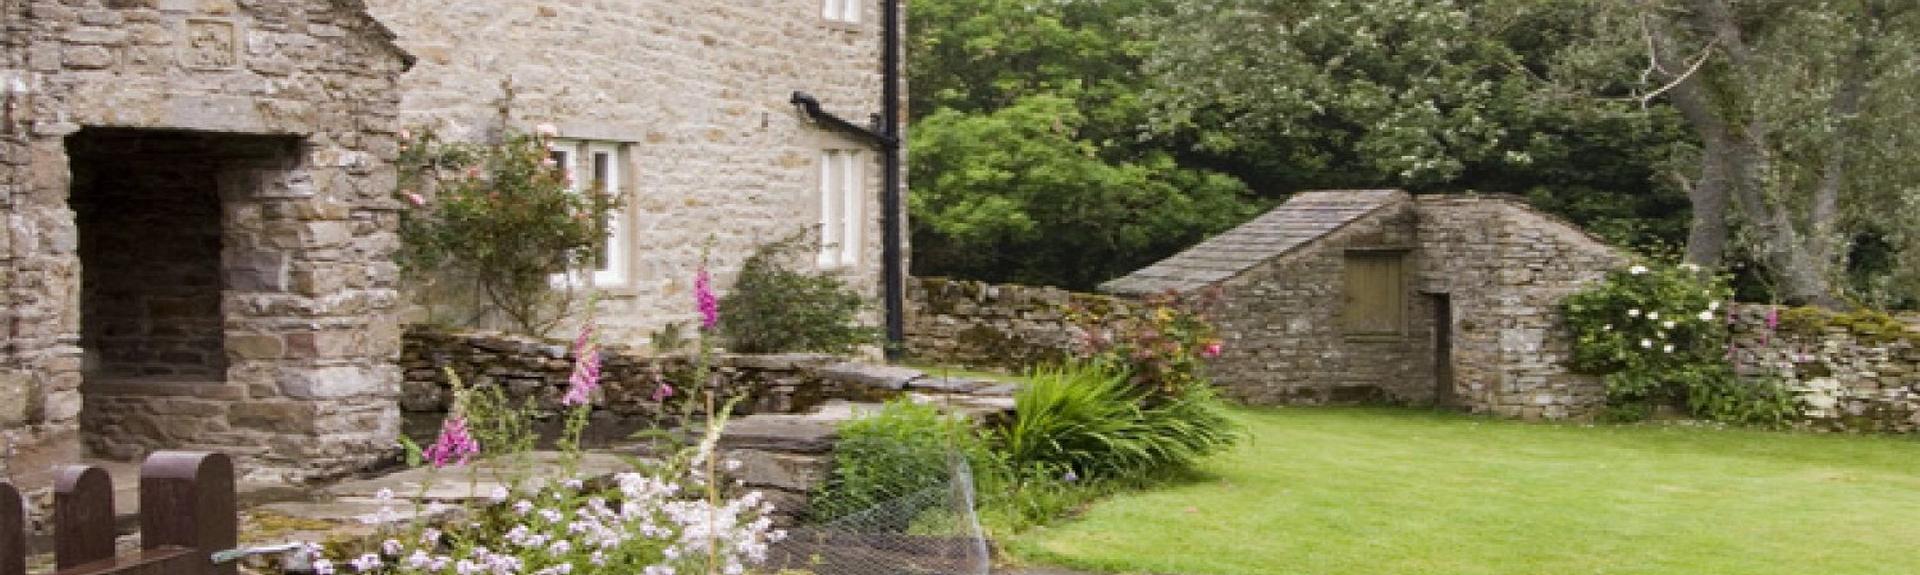 A stone cottage with a large porch overlooks a walled lawn and flower beds.